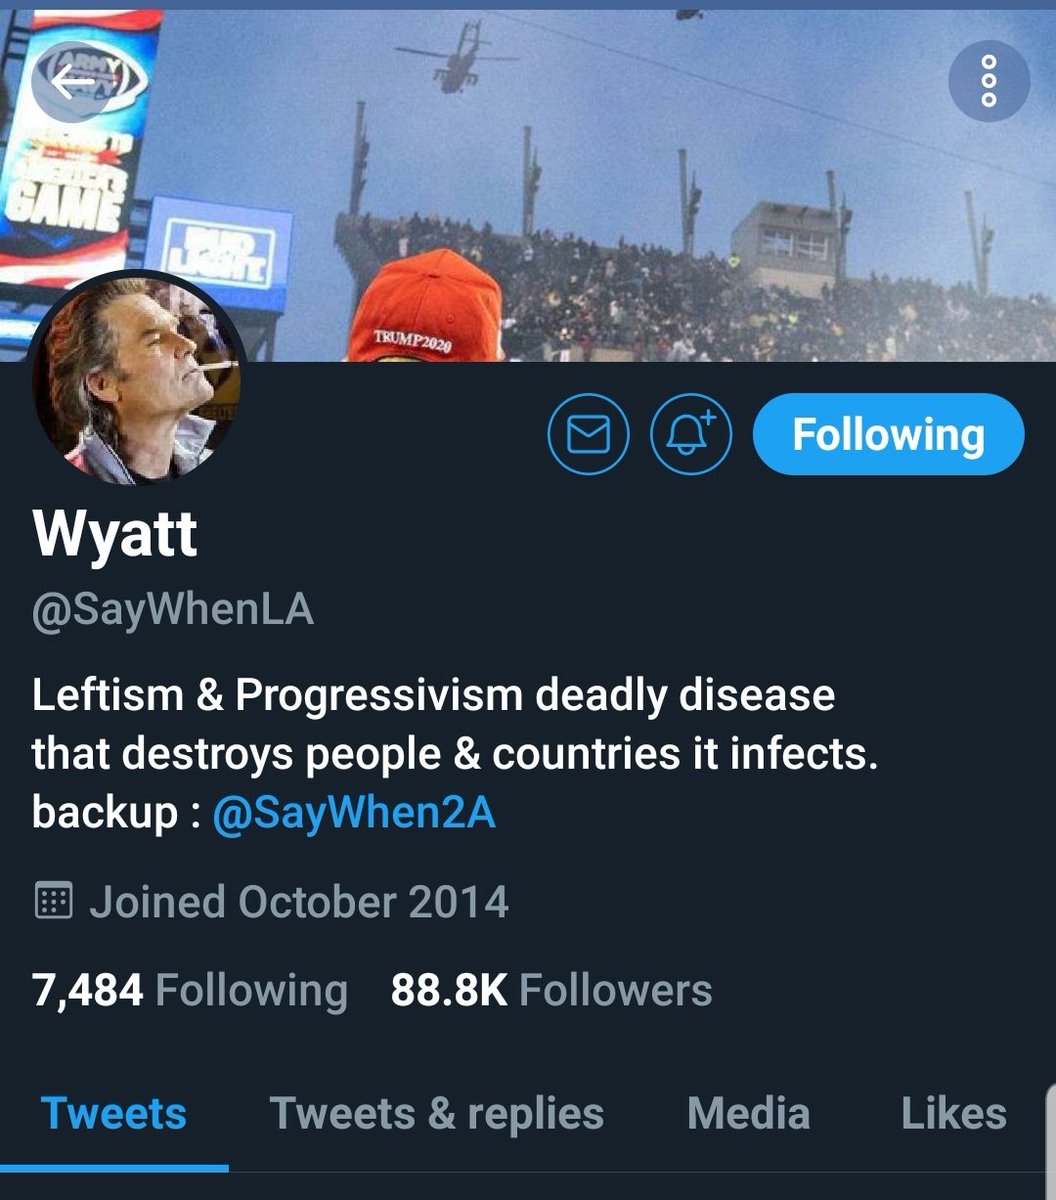 Another large Conservative voice silenced by #TwitterCensorship. 

@SayWhenLA vaporized overnight.